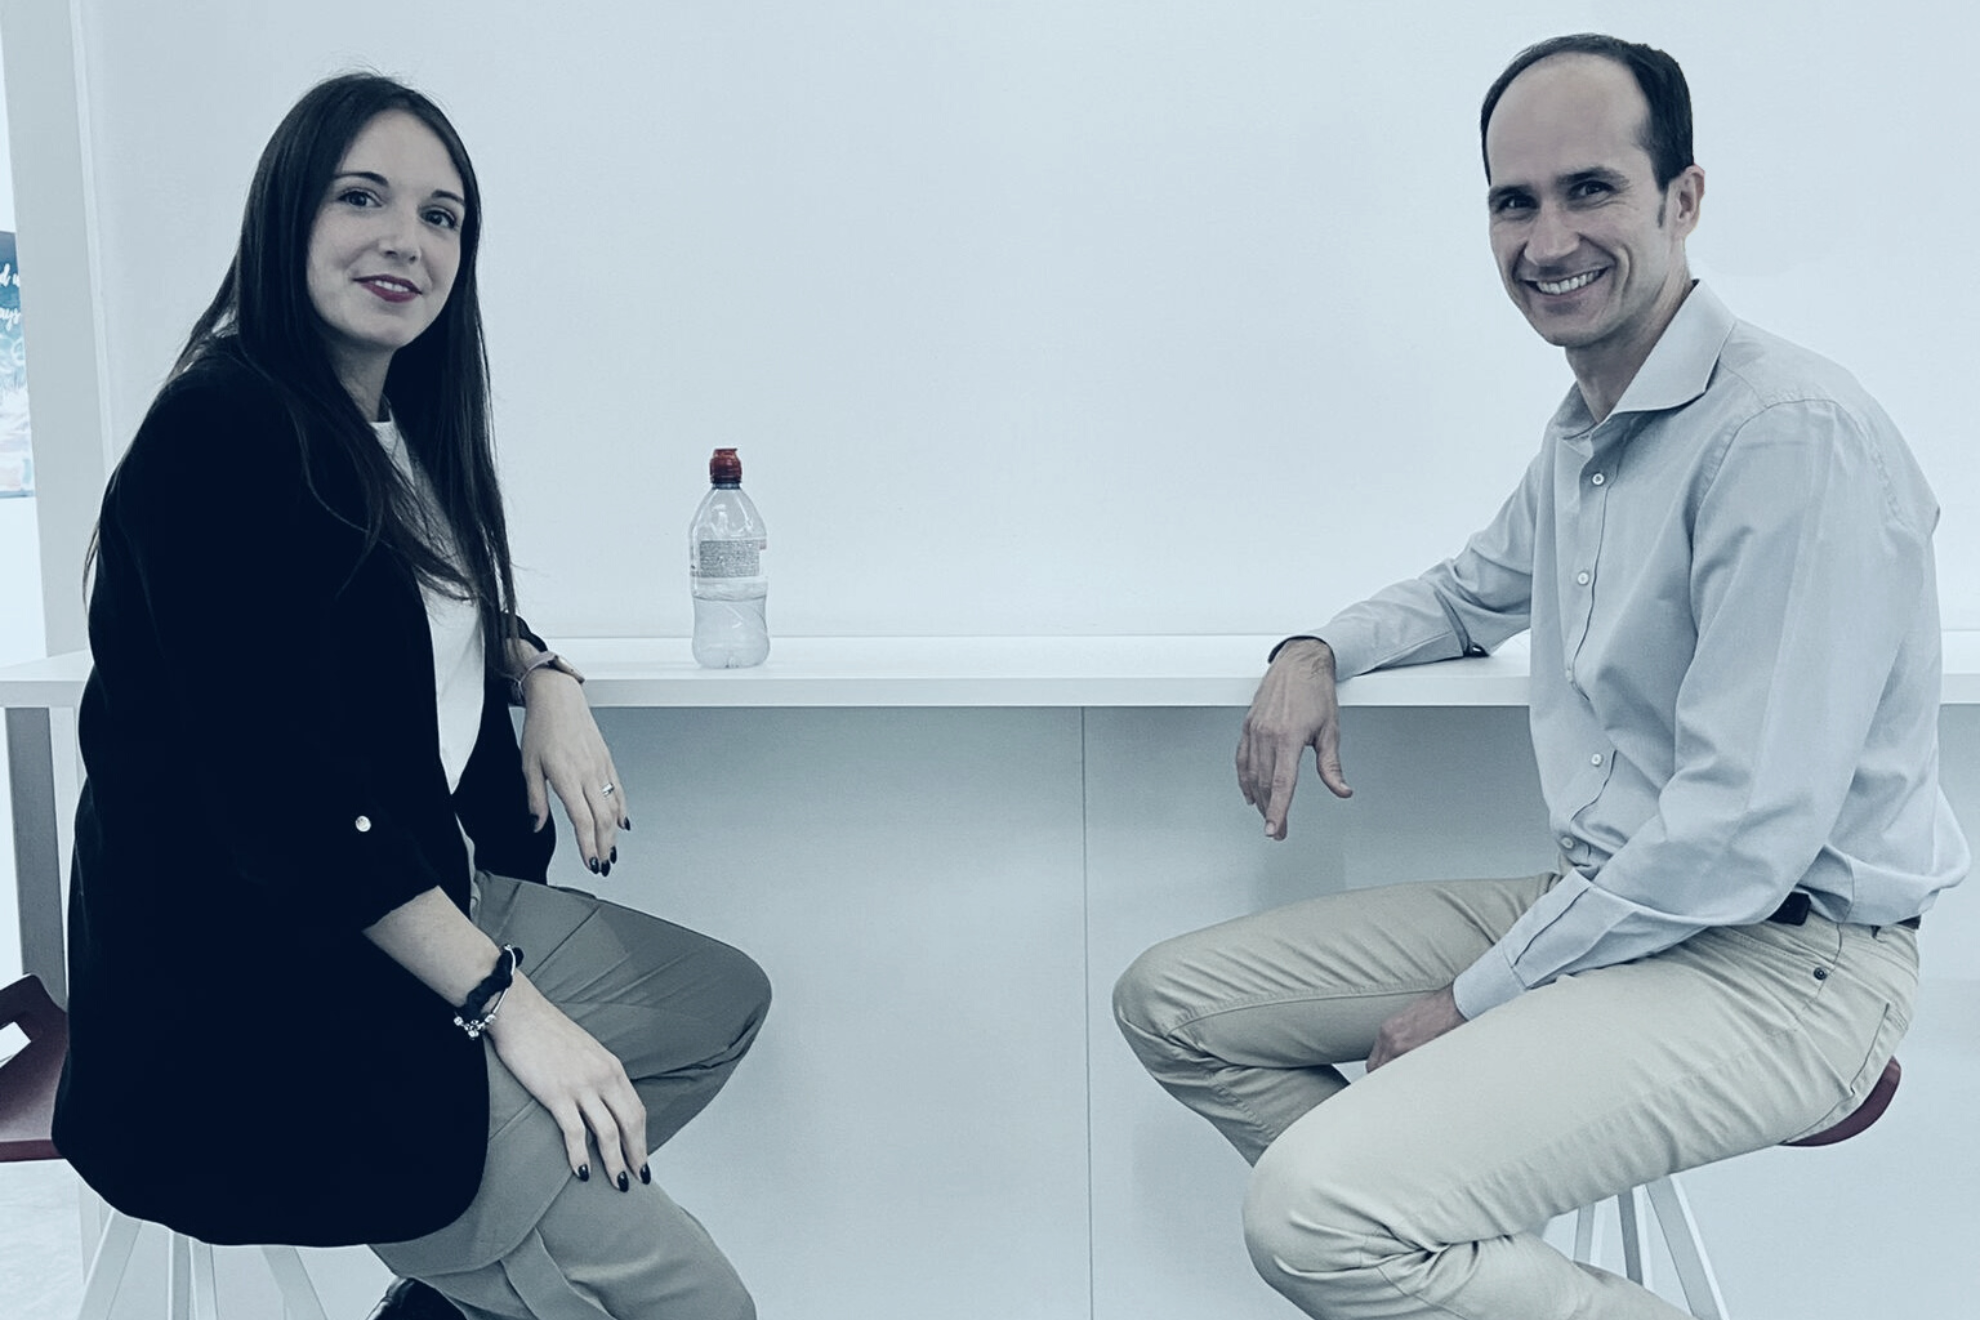 Interview with Natalia Salvia and Javier Martínez, employment consultants and payroll specialists